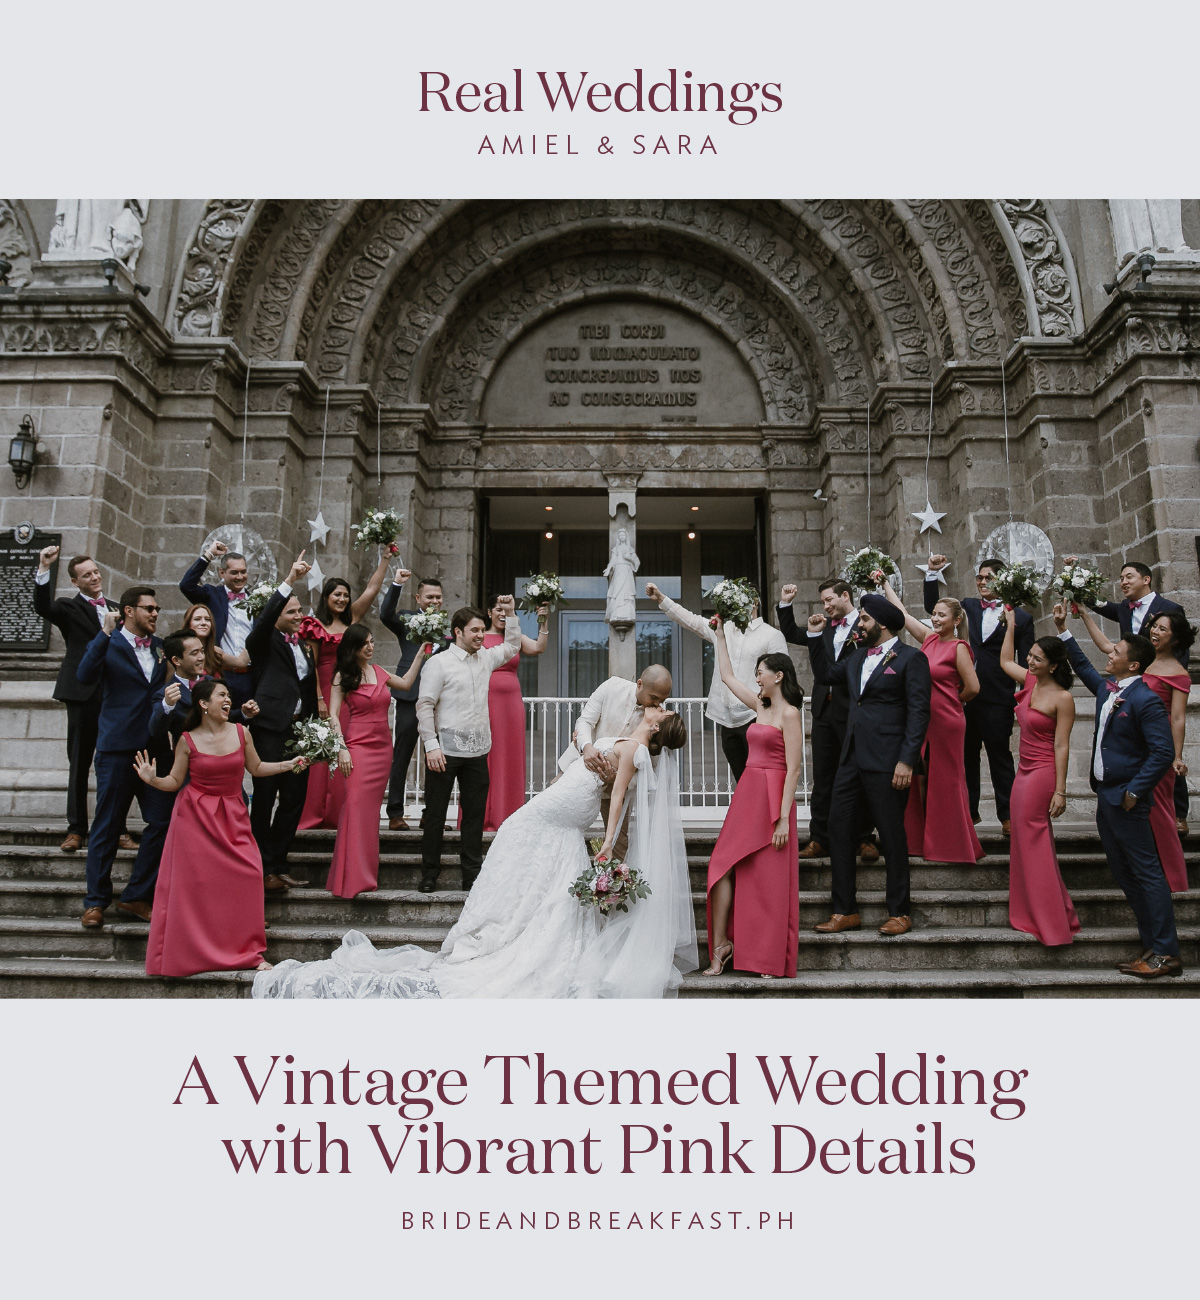 A Vintage Themed Wedding with Vibrant Pink Details